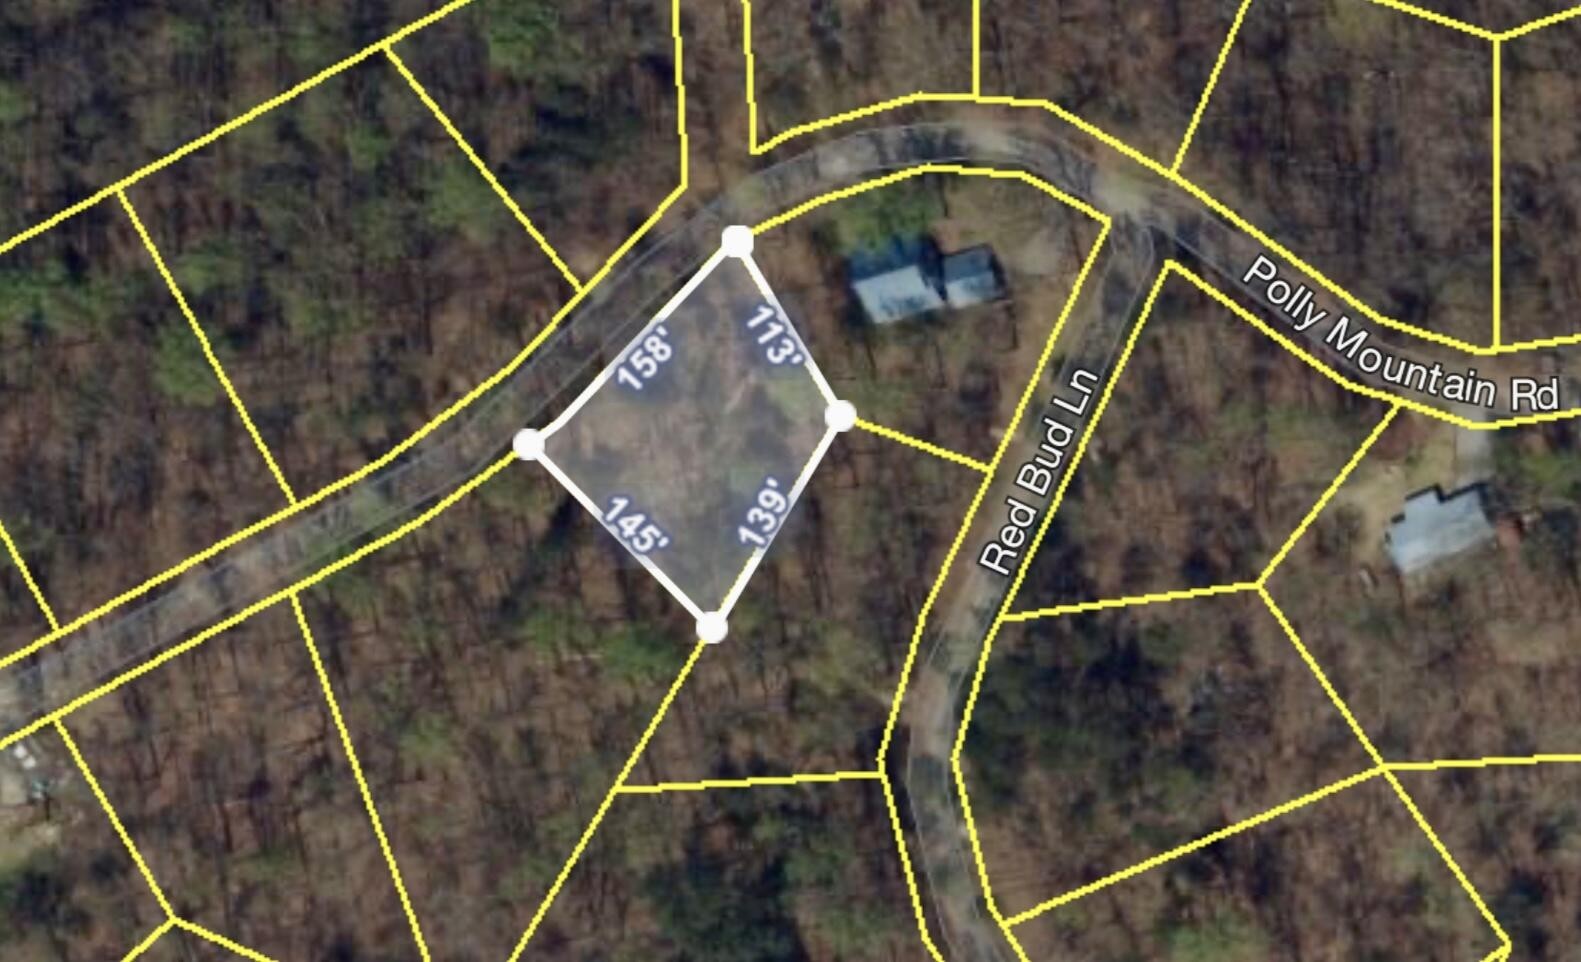 5. Lot 72&amp;73 Polly Mountain Rd